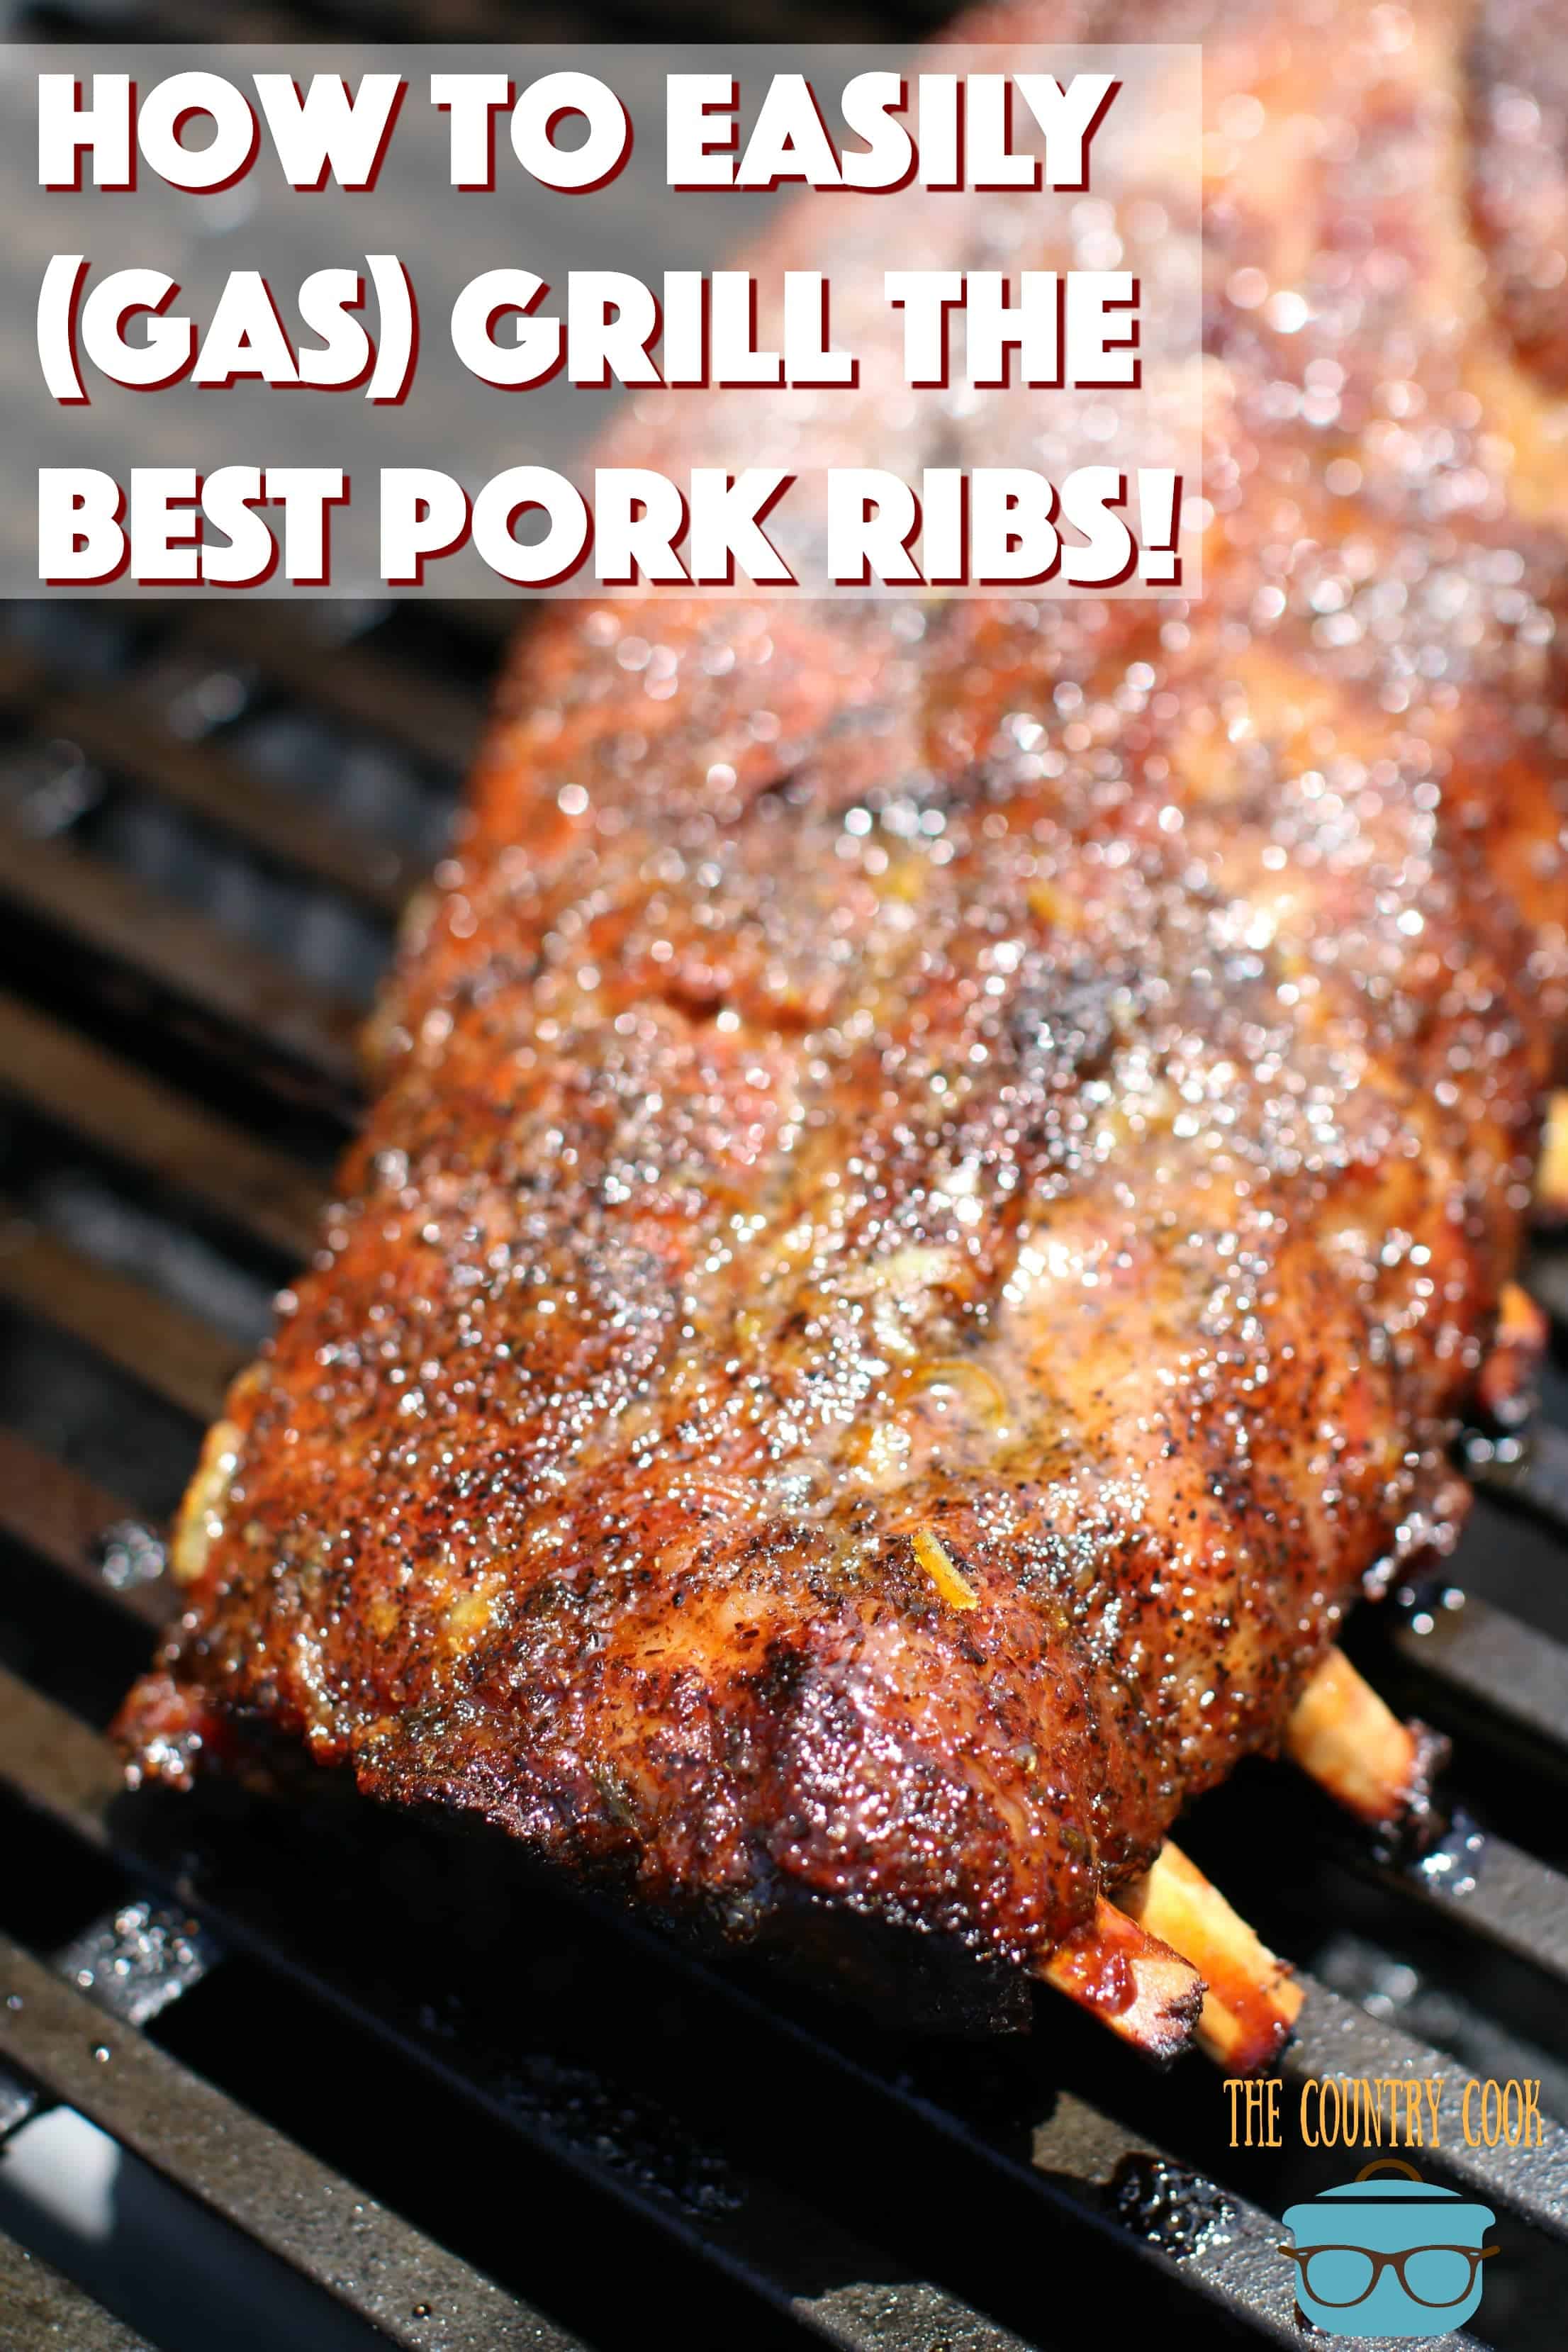 How To Grill The Best Pork Ribs Video The Country Cook,Mimosa Recipes Easy